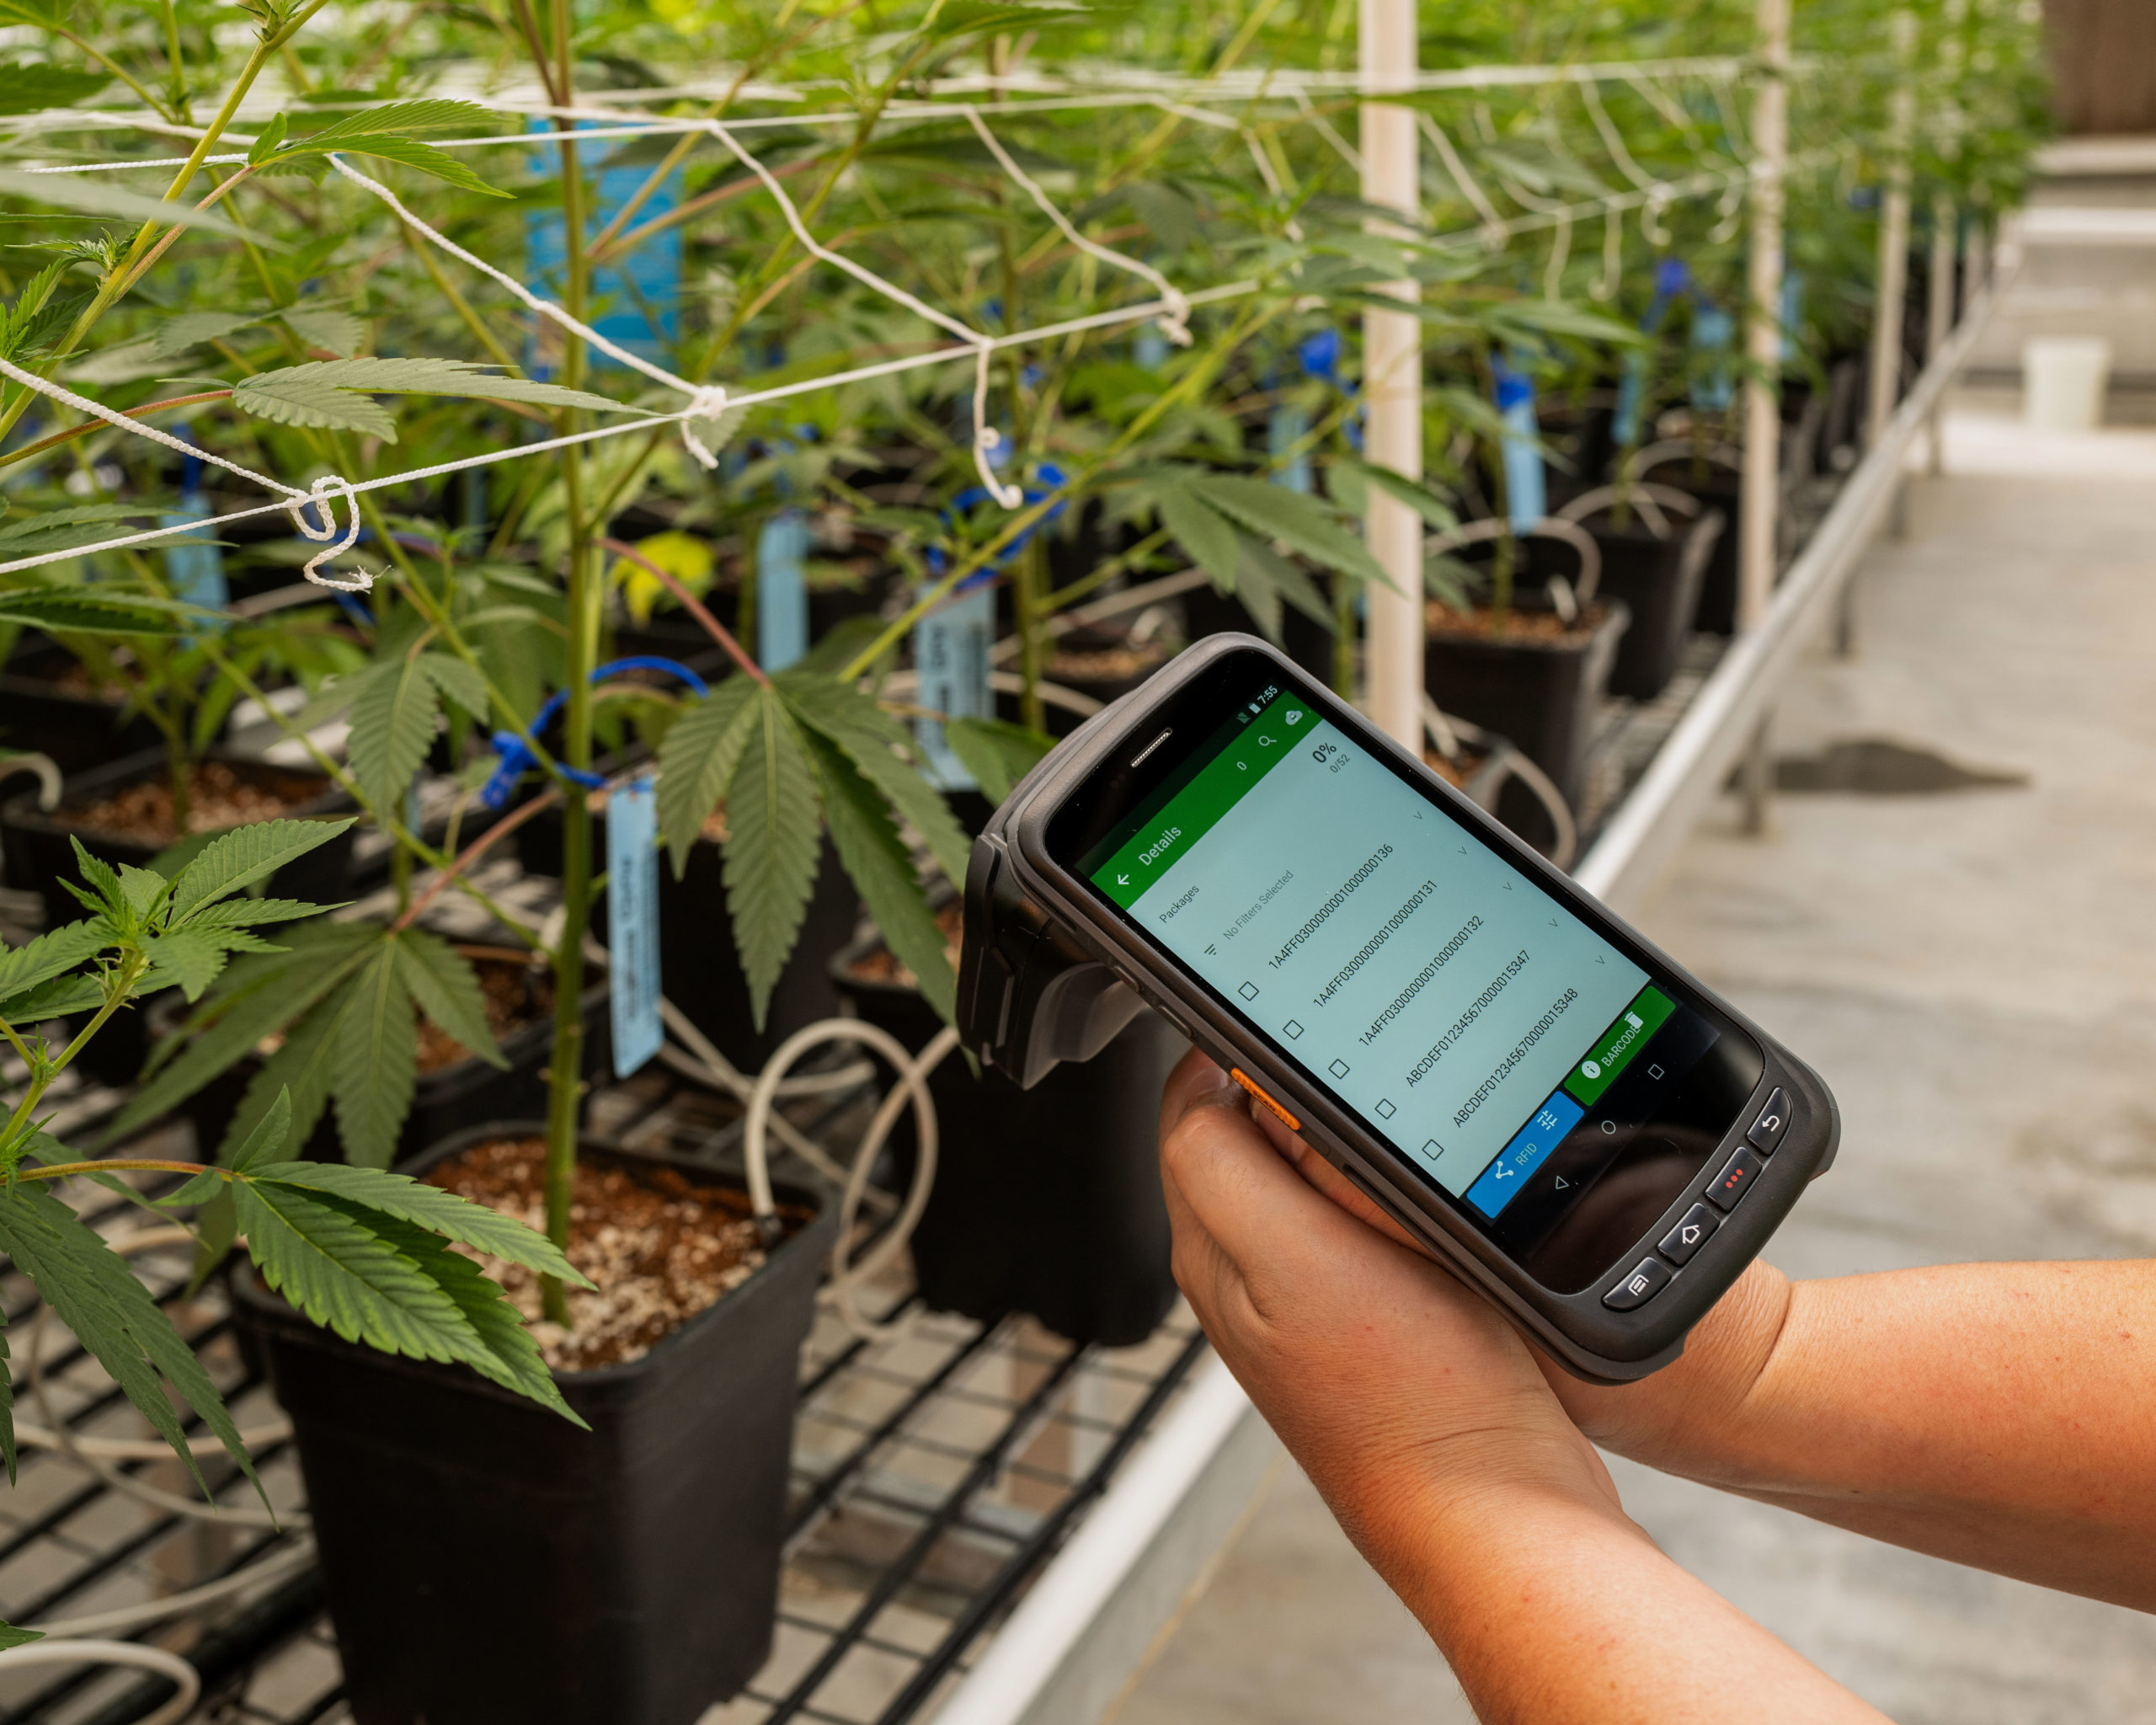 A worker using an RFID scanning device in a cannabis greenhouse